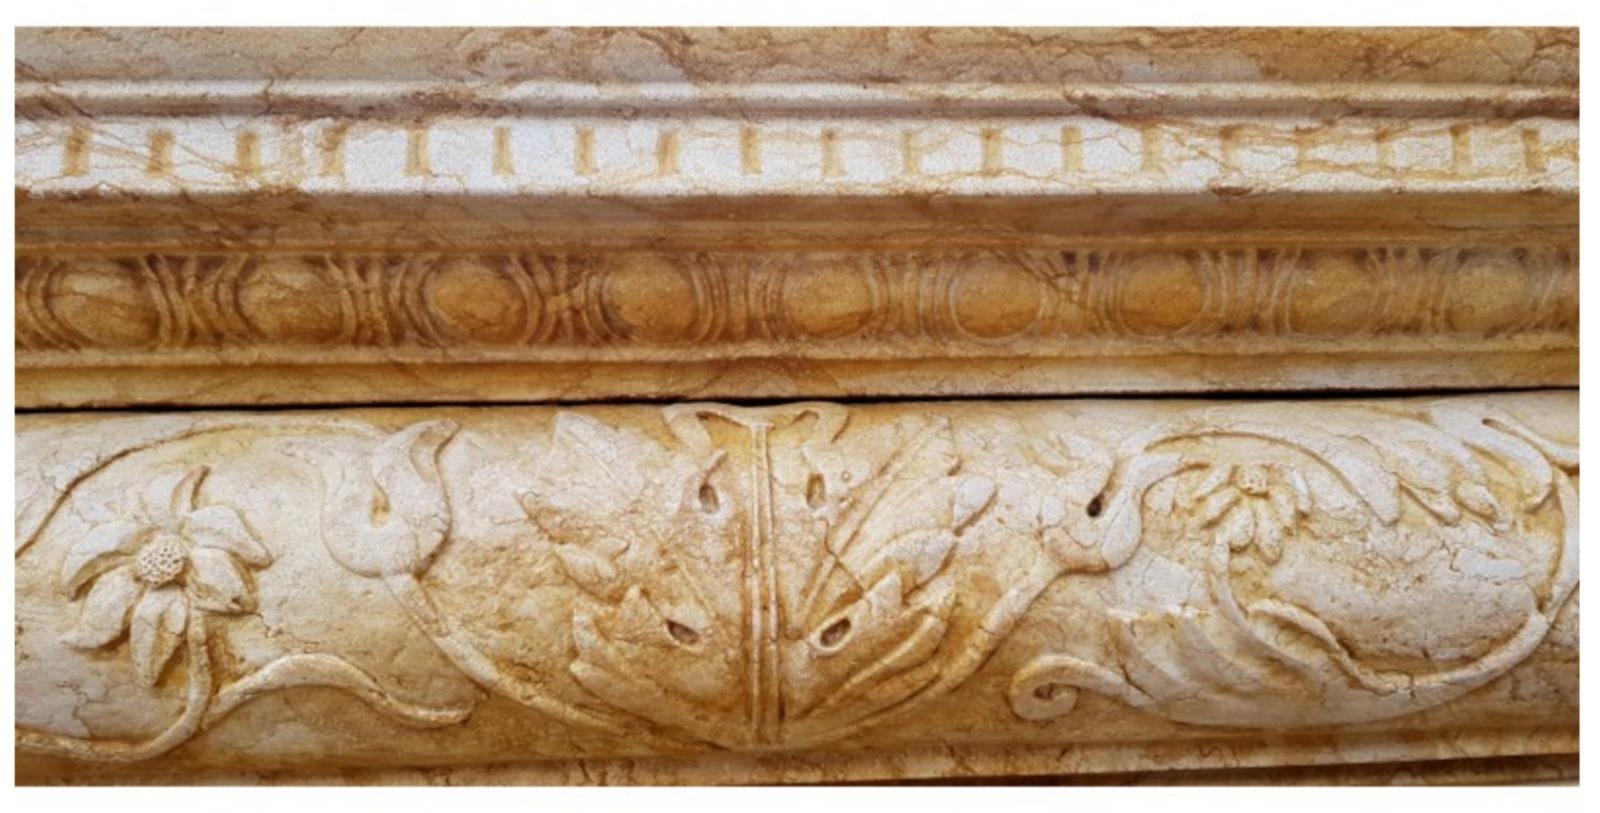 Tuscan fireplace in yellow marble
Early 20th century

Characterized by a high relief ornamentation, with masks, cherubs, winged cherubs, rosettes and floral Achantus leaf motifs.
Made in 